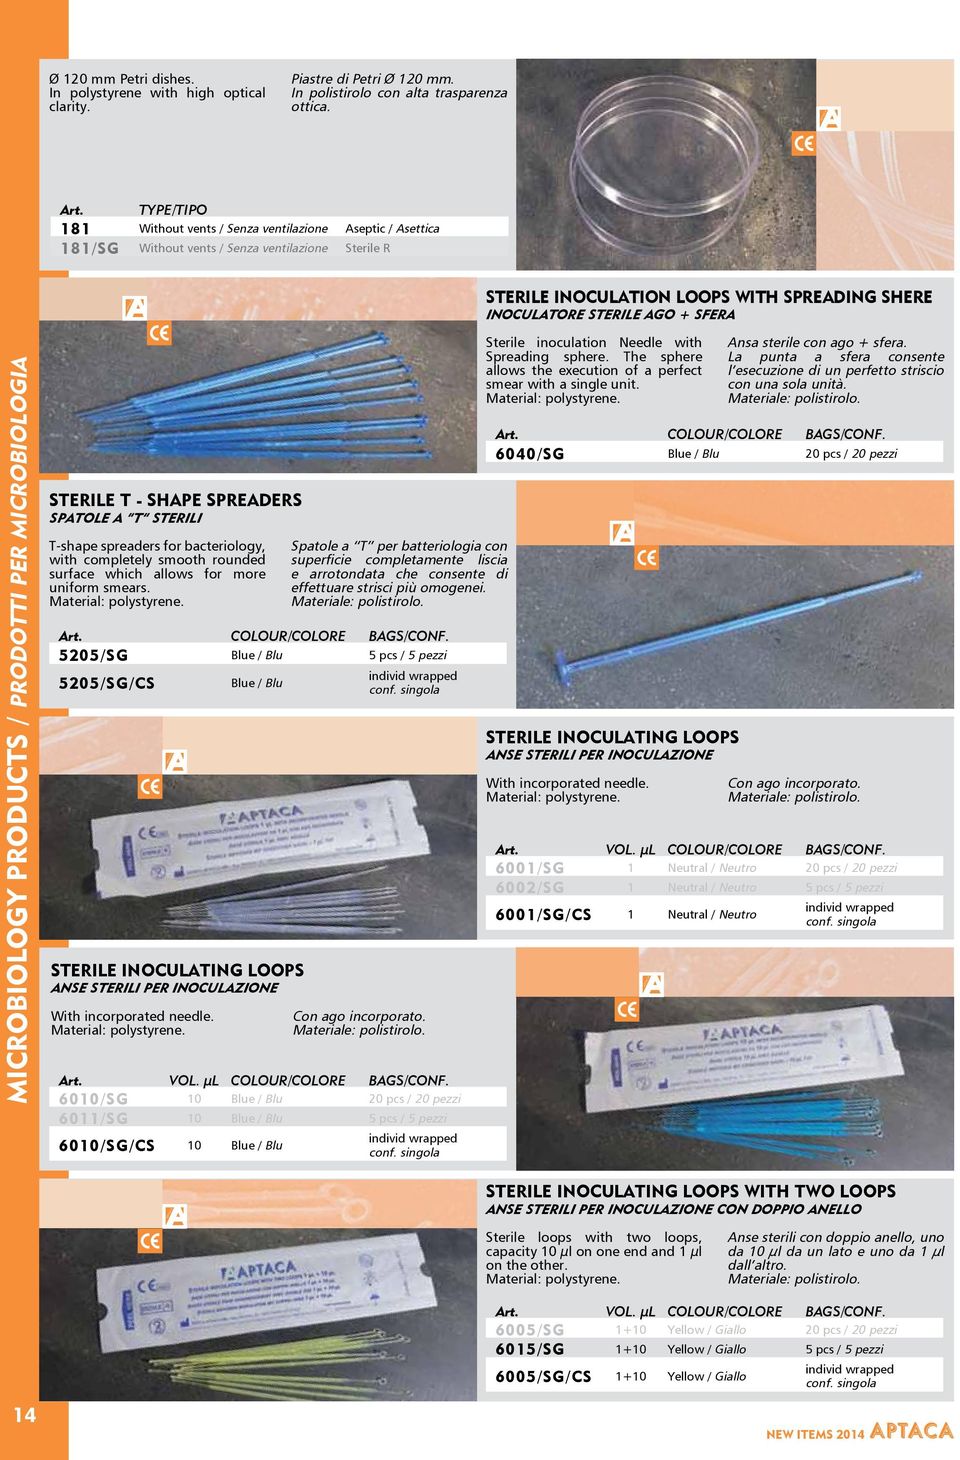 MICROBIOLOGY PRODUCTS / PRODOTTI PER MICROBIOLOGIA STERILE T - SHAPE SPREADERS SPATOLE A T STERILI T-shape spreaders for bacteriology, with completely smooth rounded surface which allows for more